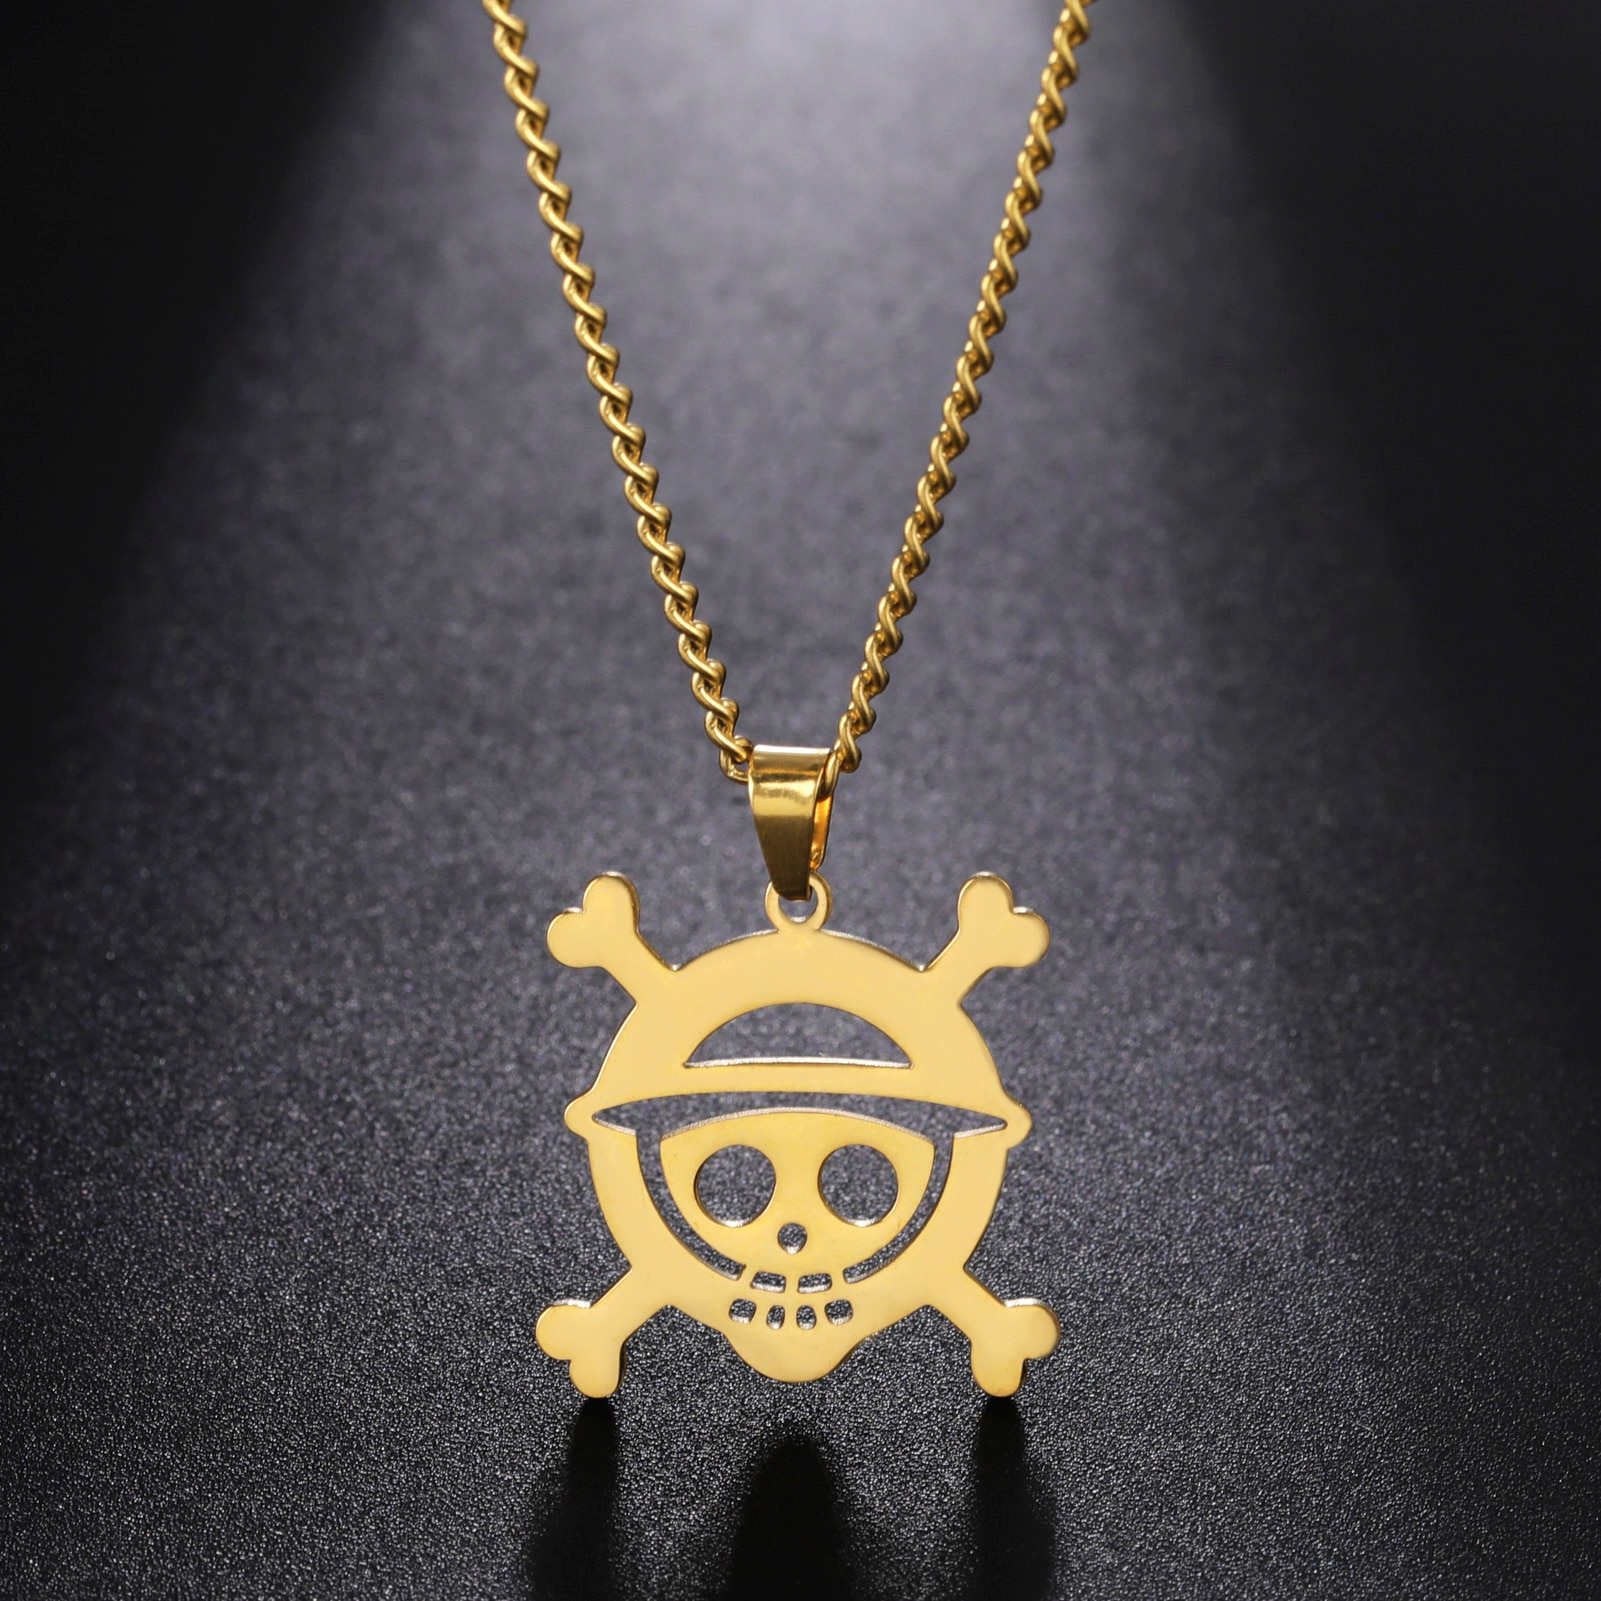 One Piece – Pirate Skeleton Themed Necklaces (2 Designs) Pendants & Necklaces